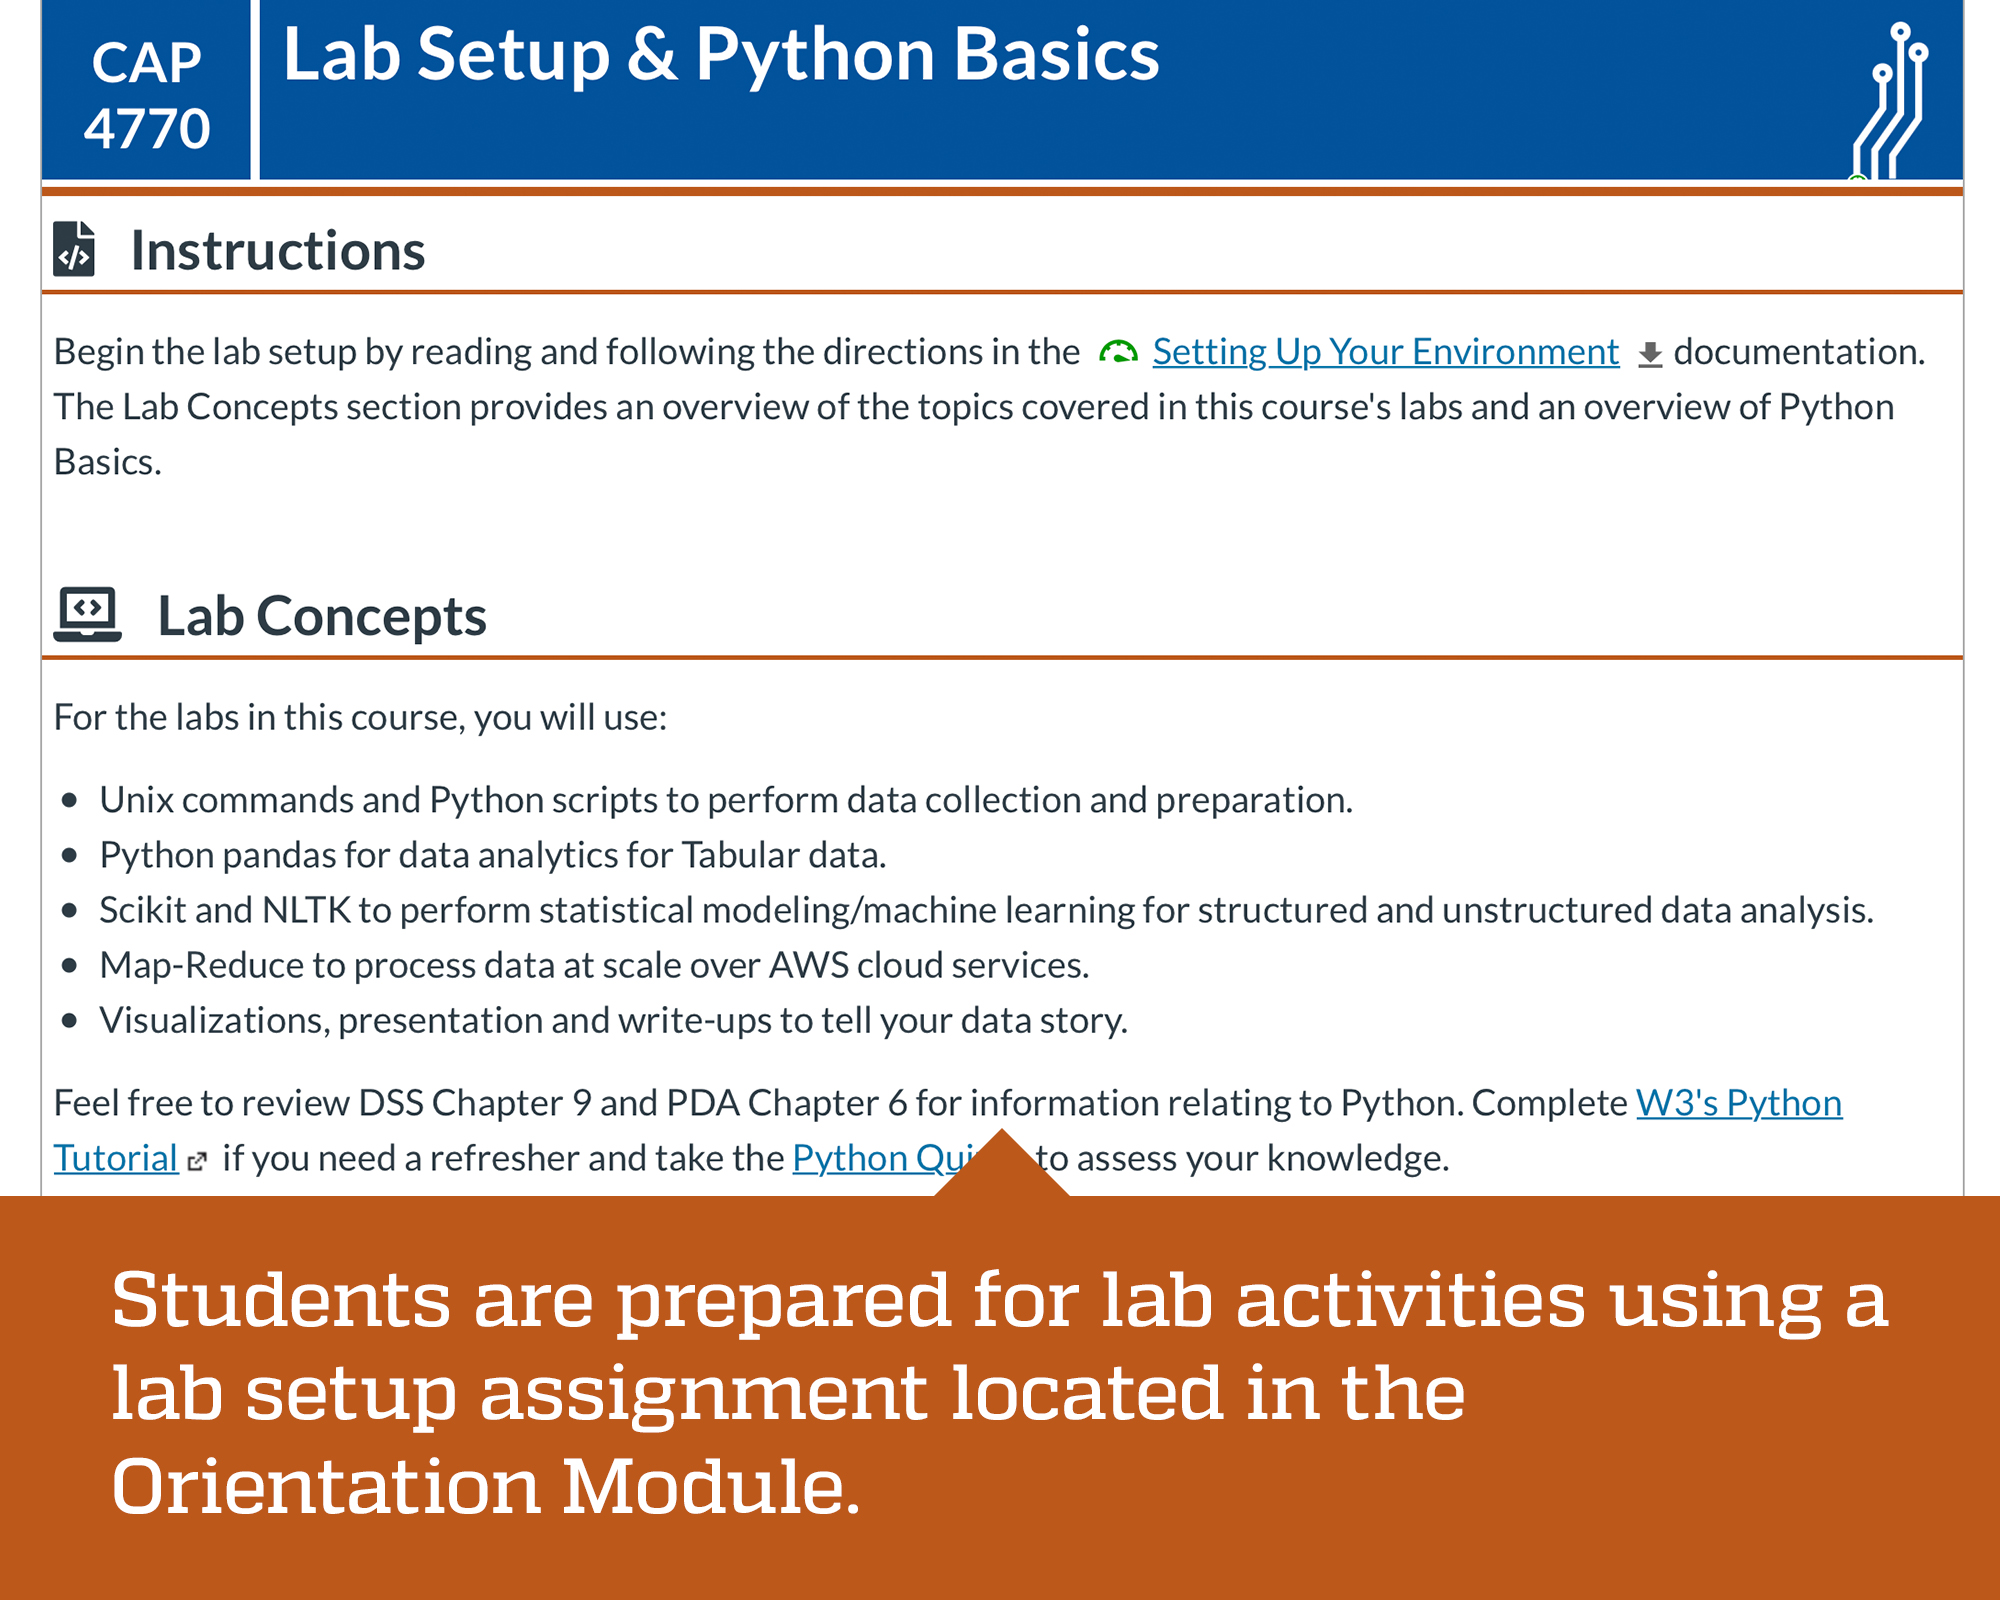 Course lab basics page designed by Center for Online Innovation and Production at University of Florida